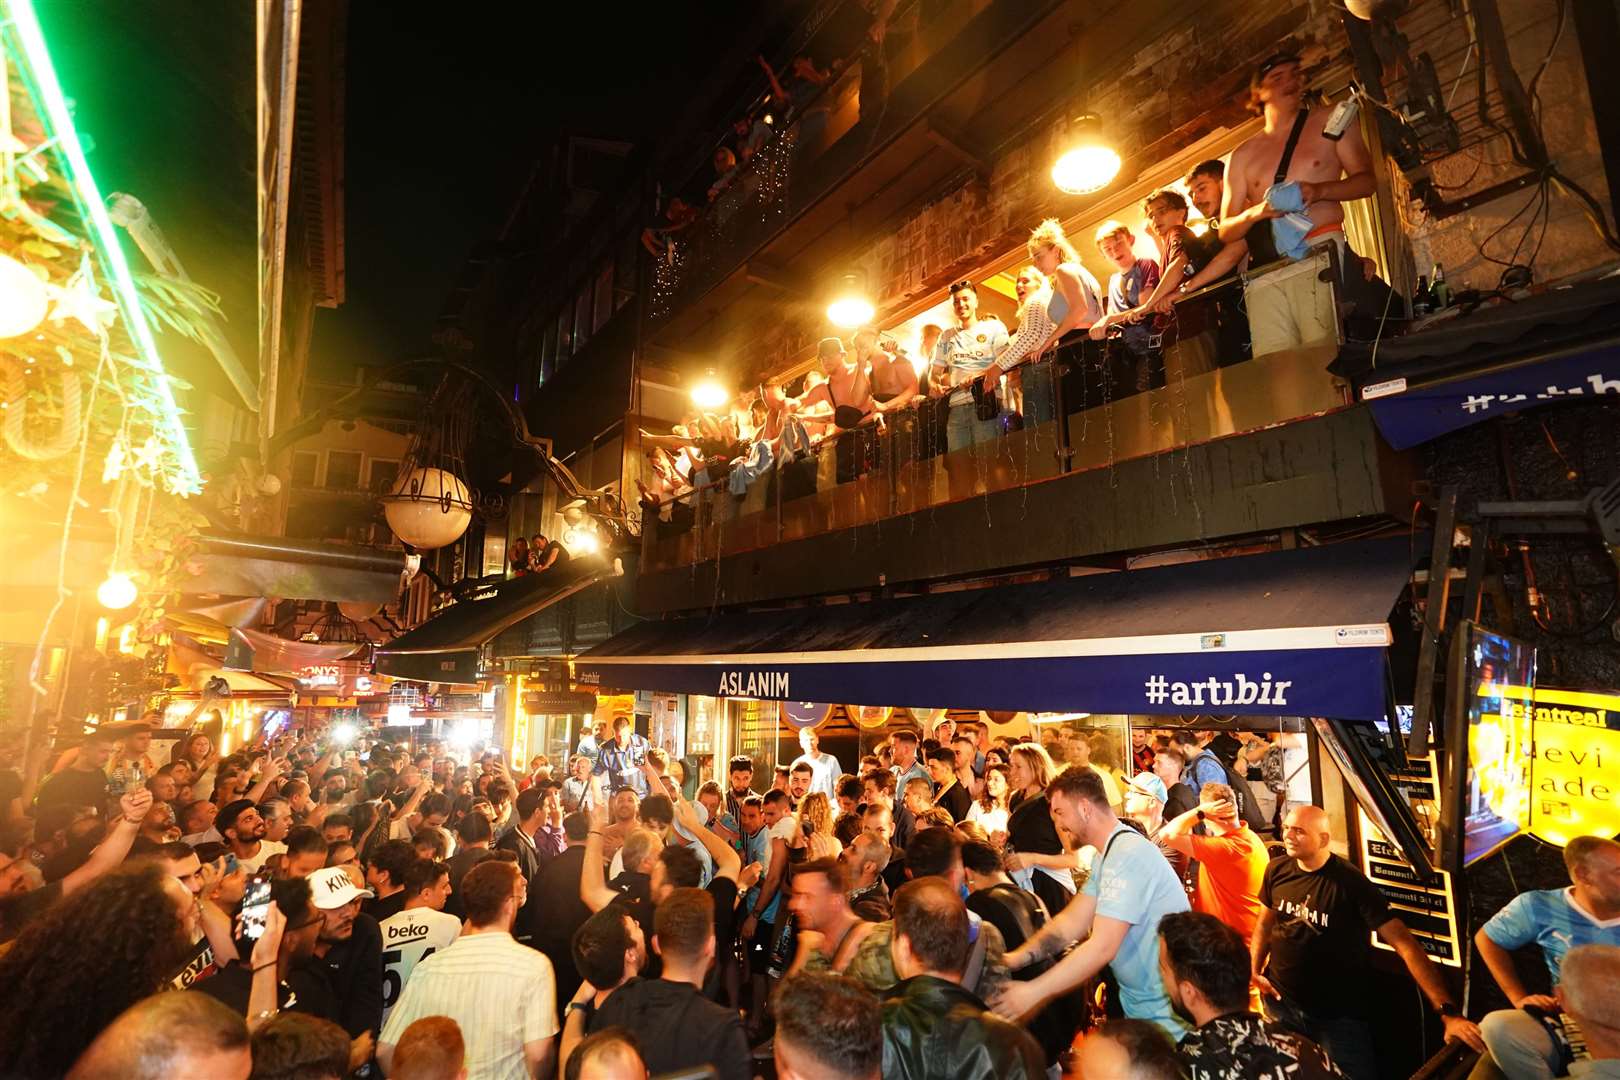 Man City fans celebrate their team’s victory in central Istanbul (James Manning/PA)